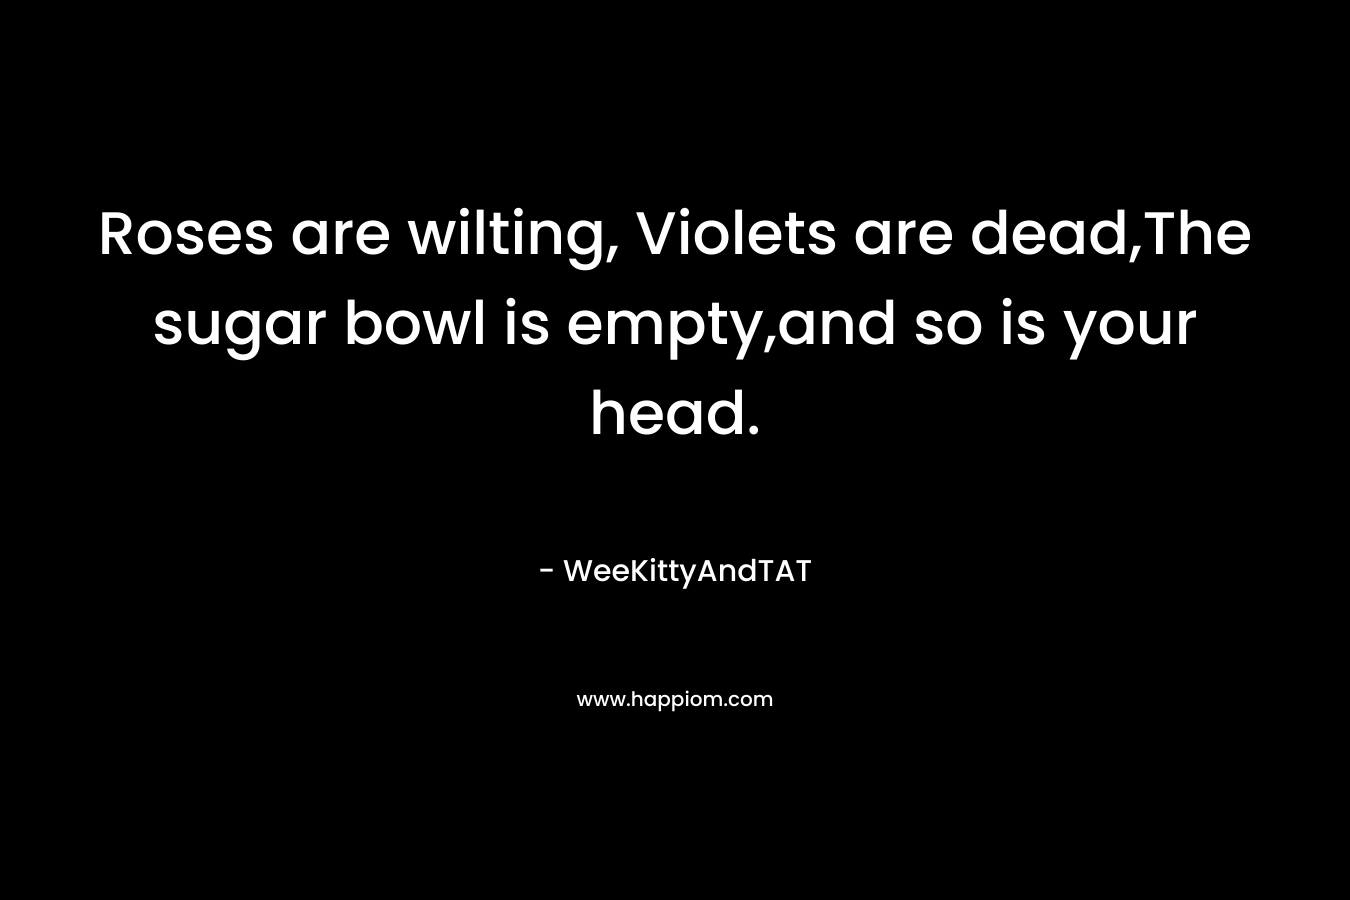 Roses are wilting, Violets are dead,The sugar bowl is empty,and so is your head.